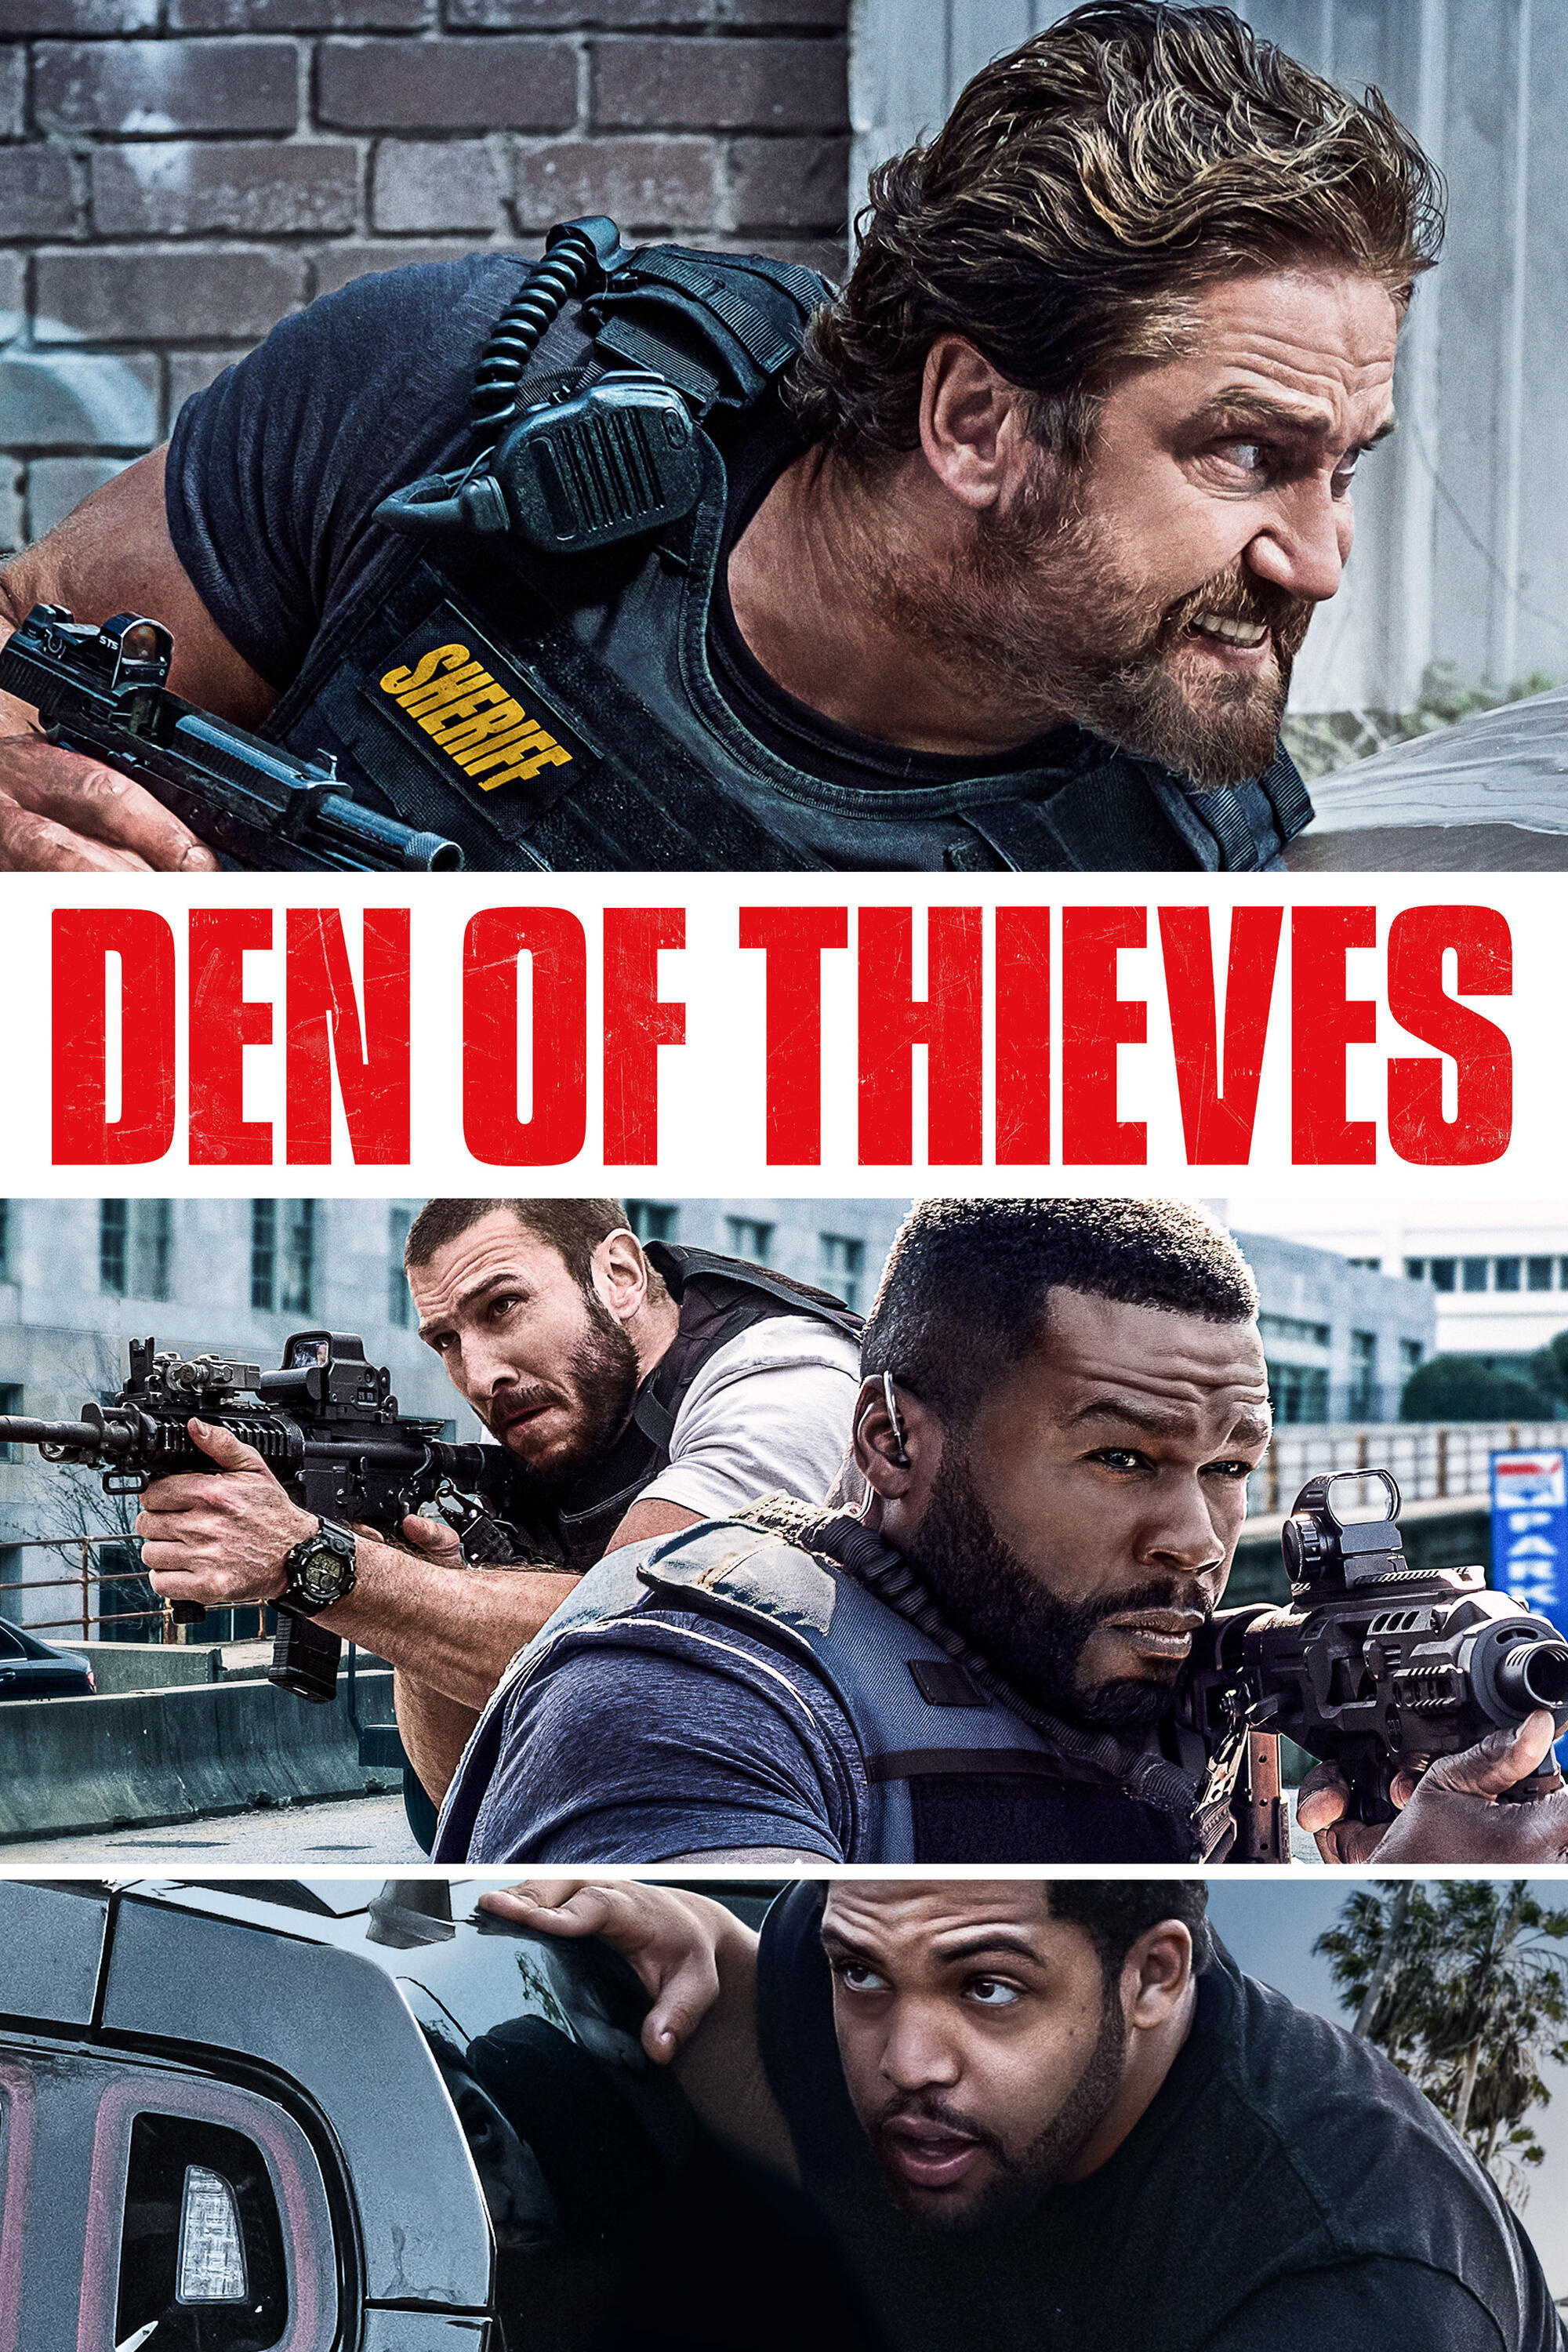 Den of Thieves (Movie) Wallpapers (25+ images inside)